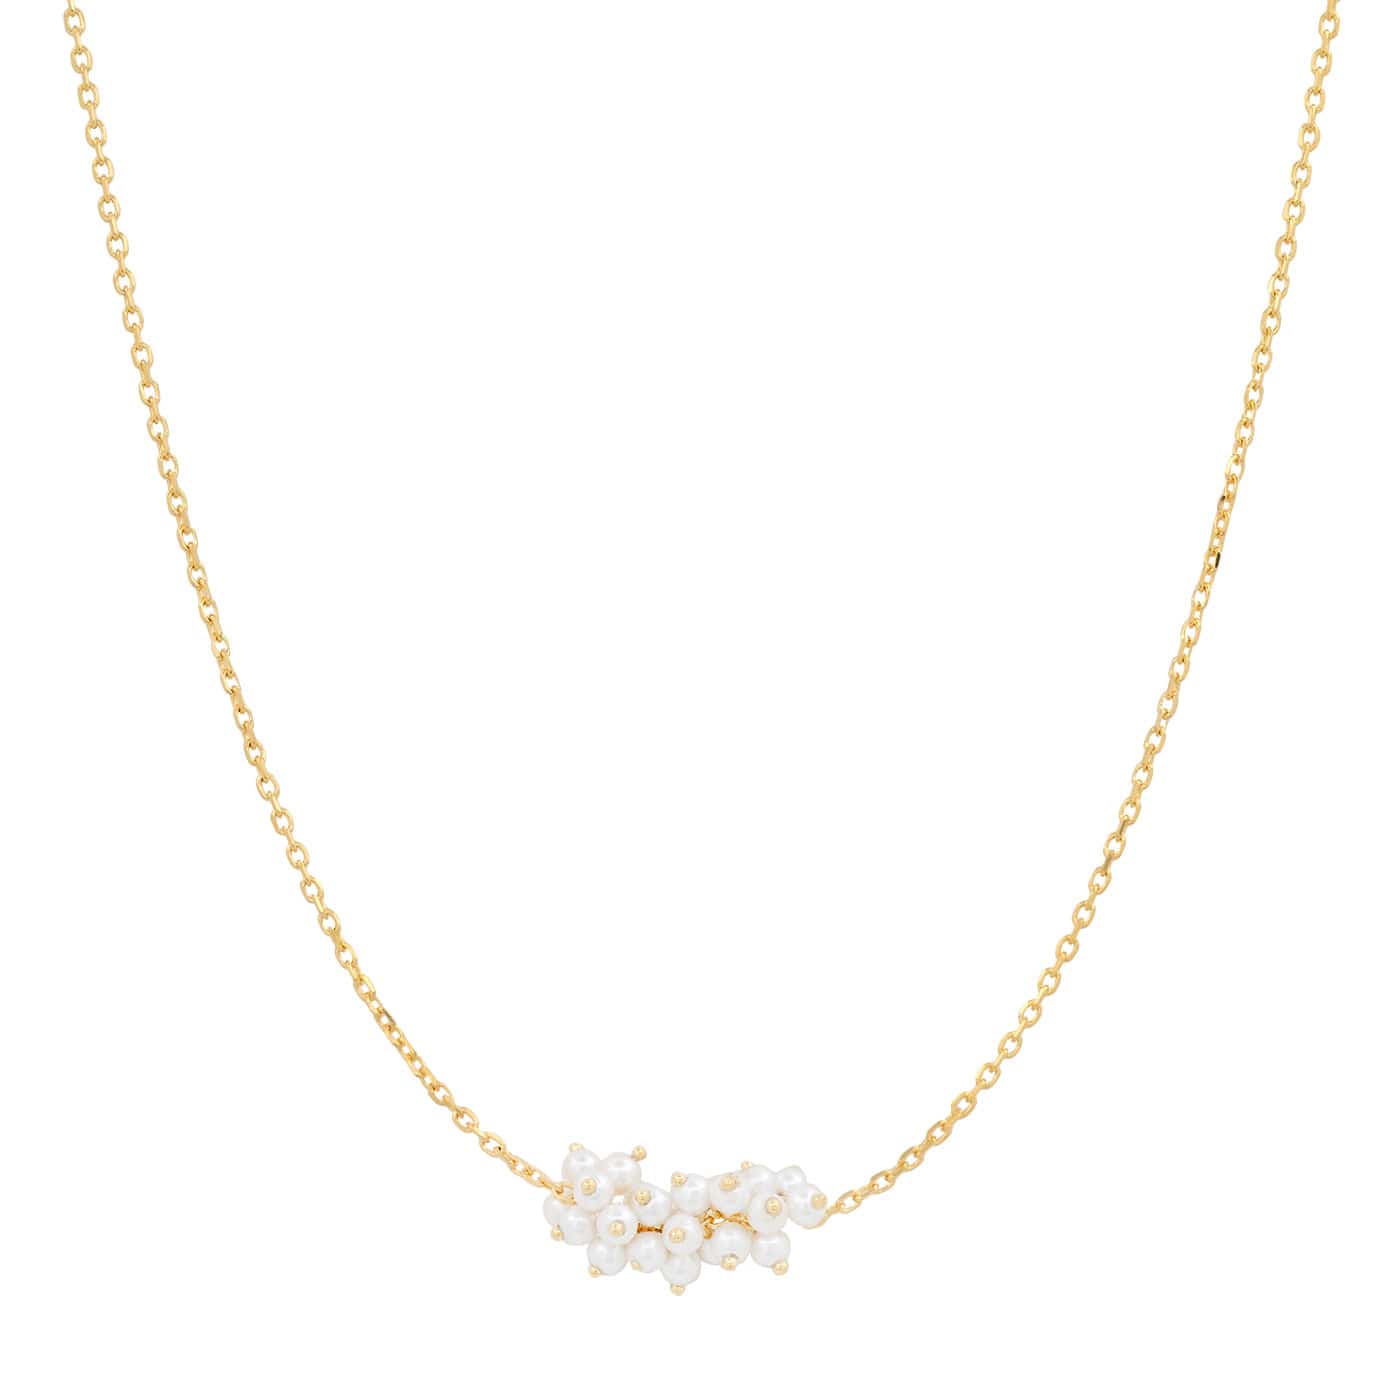 Gold Vermeil Chain with Freshwater Pearl Cluster